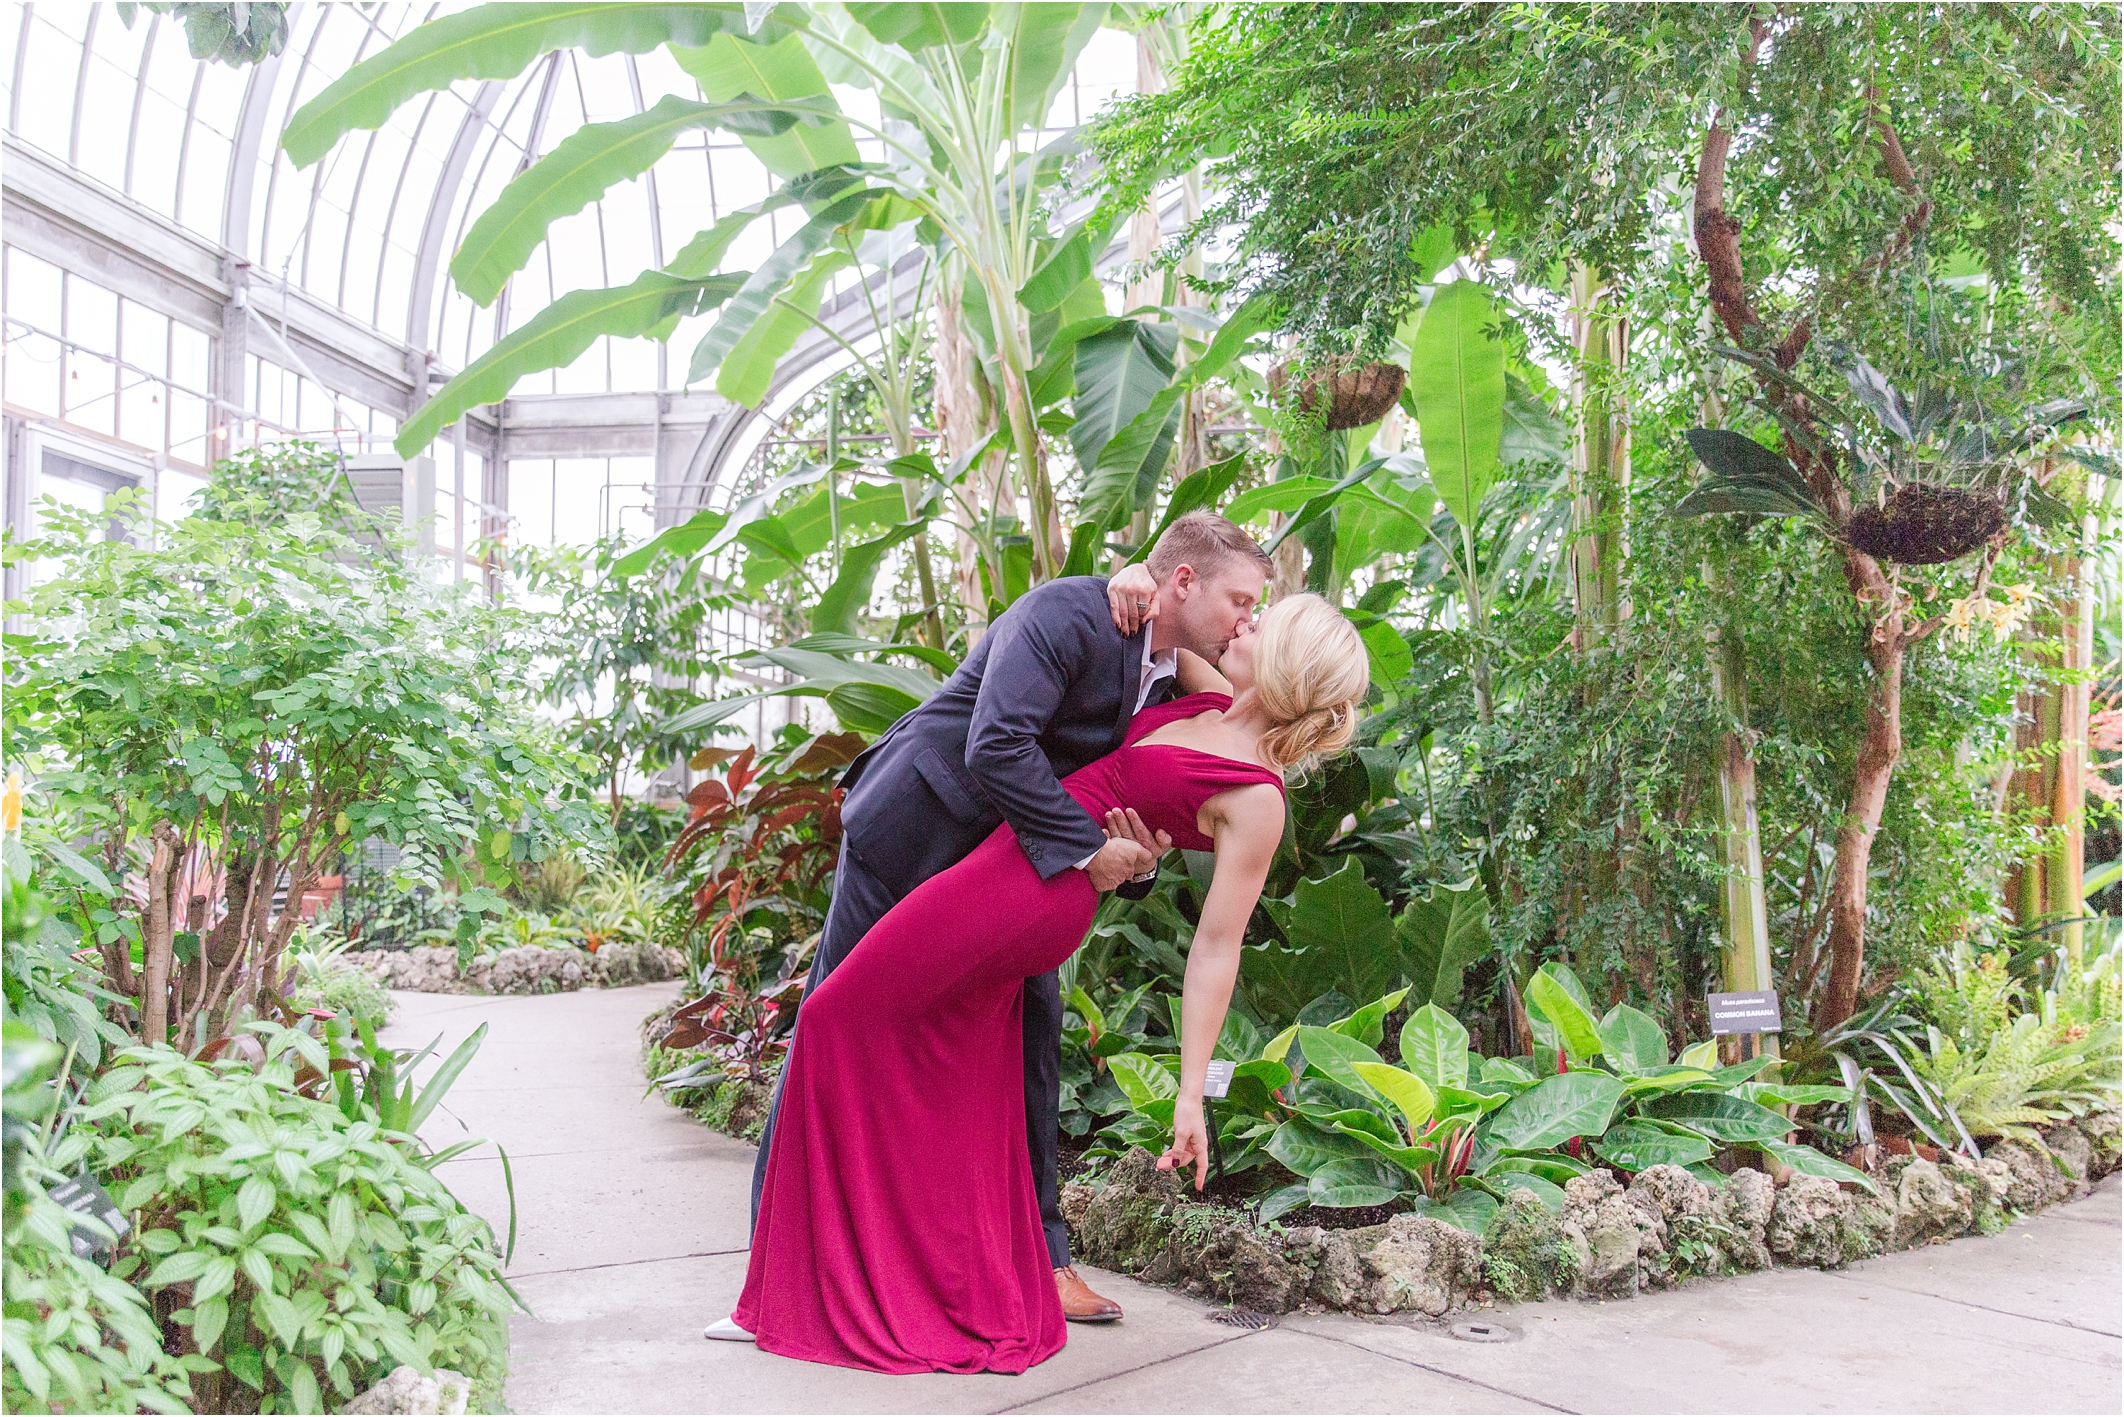 elegant-classic-belle-isle-conservatory-engagement-photos-in-detroit-mi-by-courtney-carolyn-photography_0015.jpg